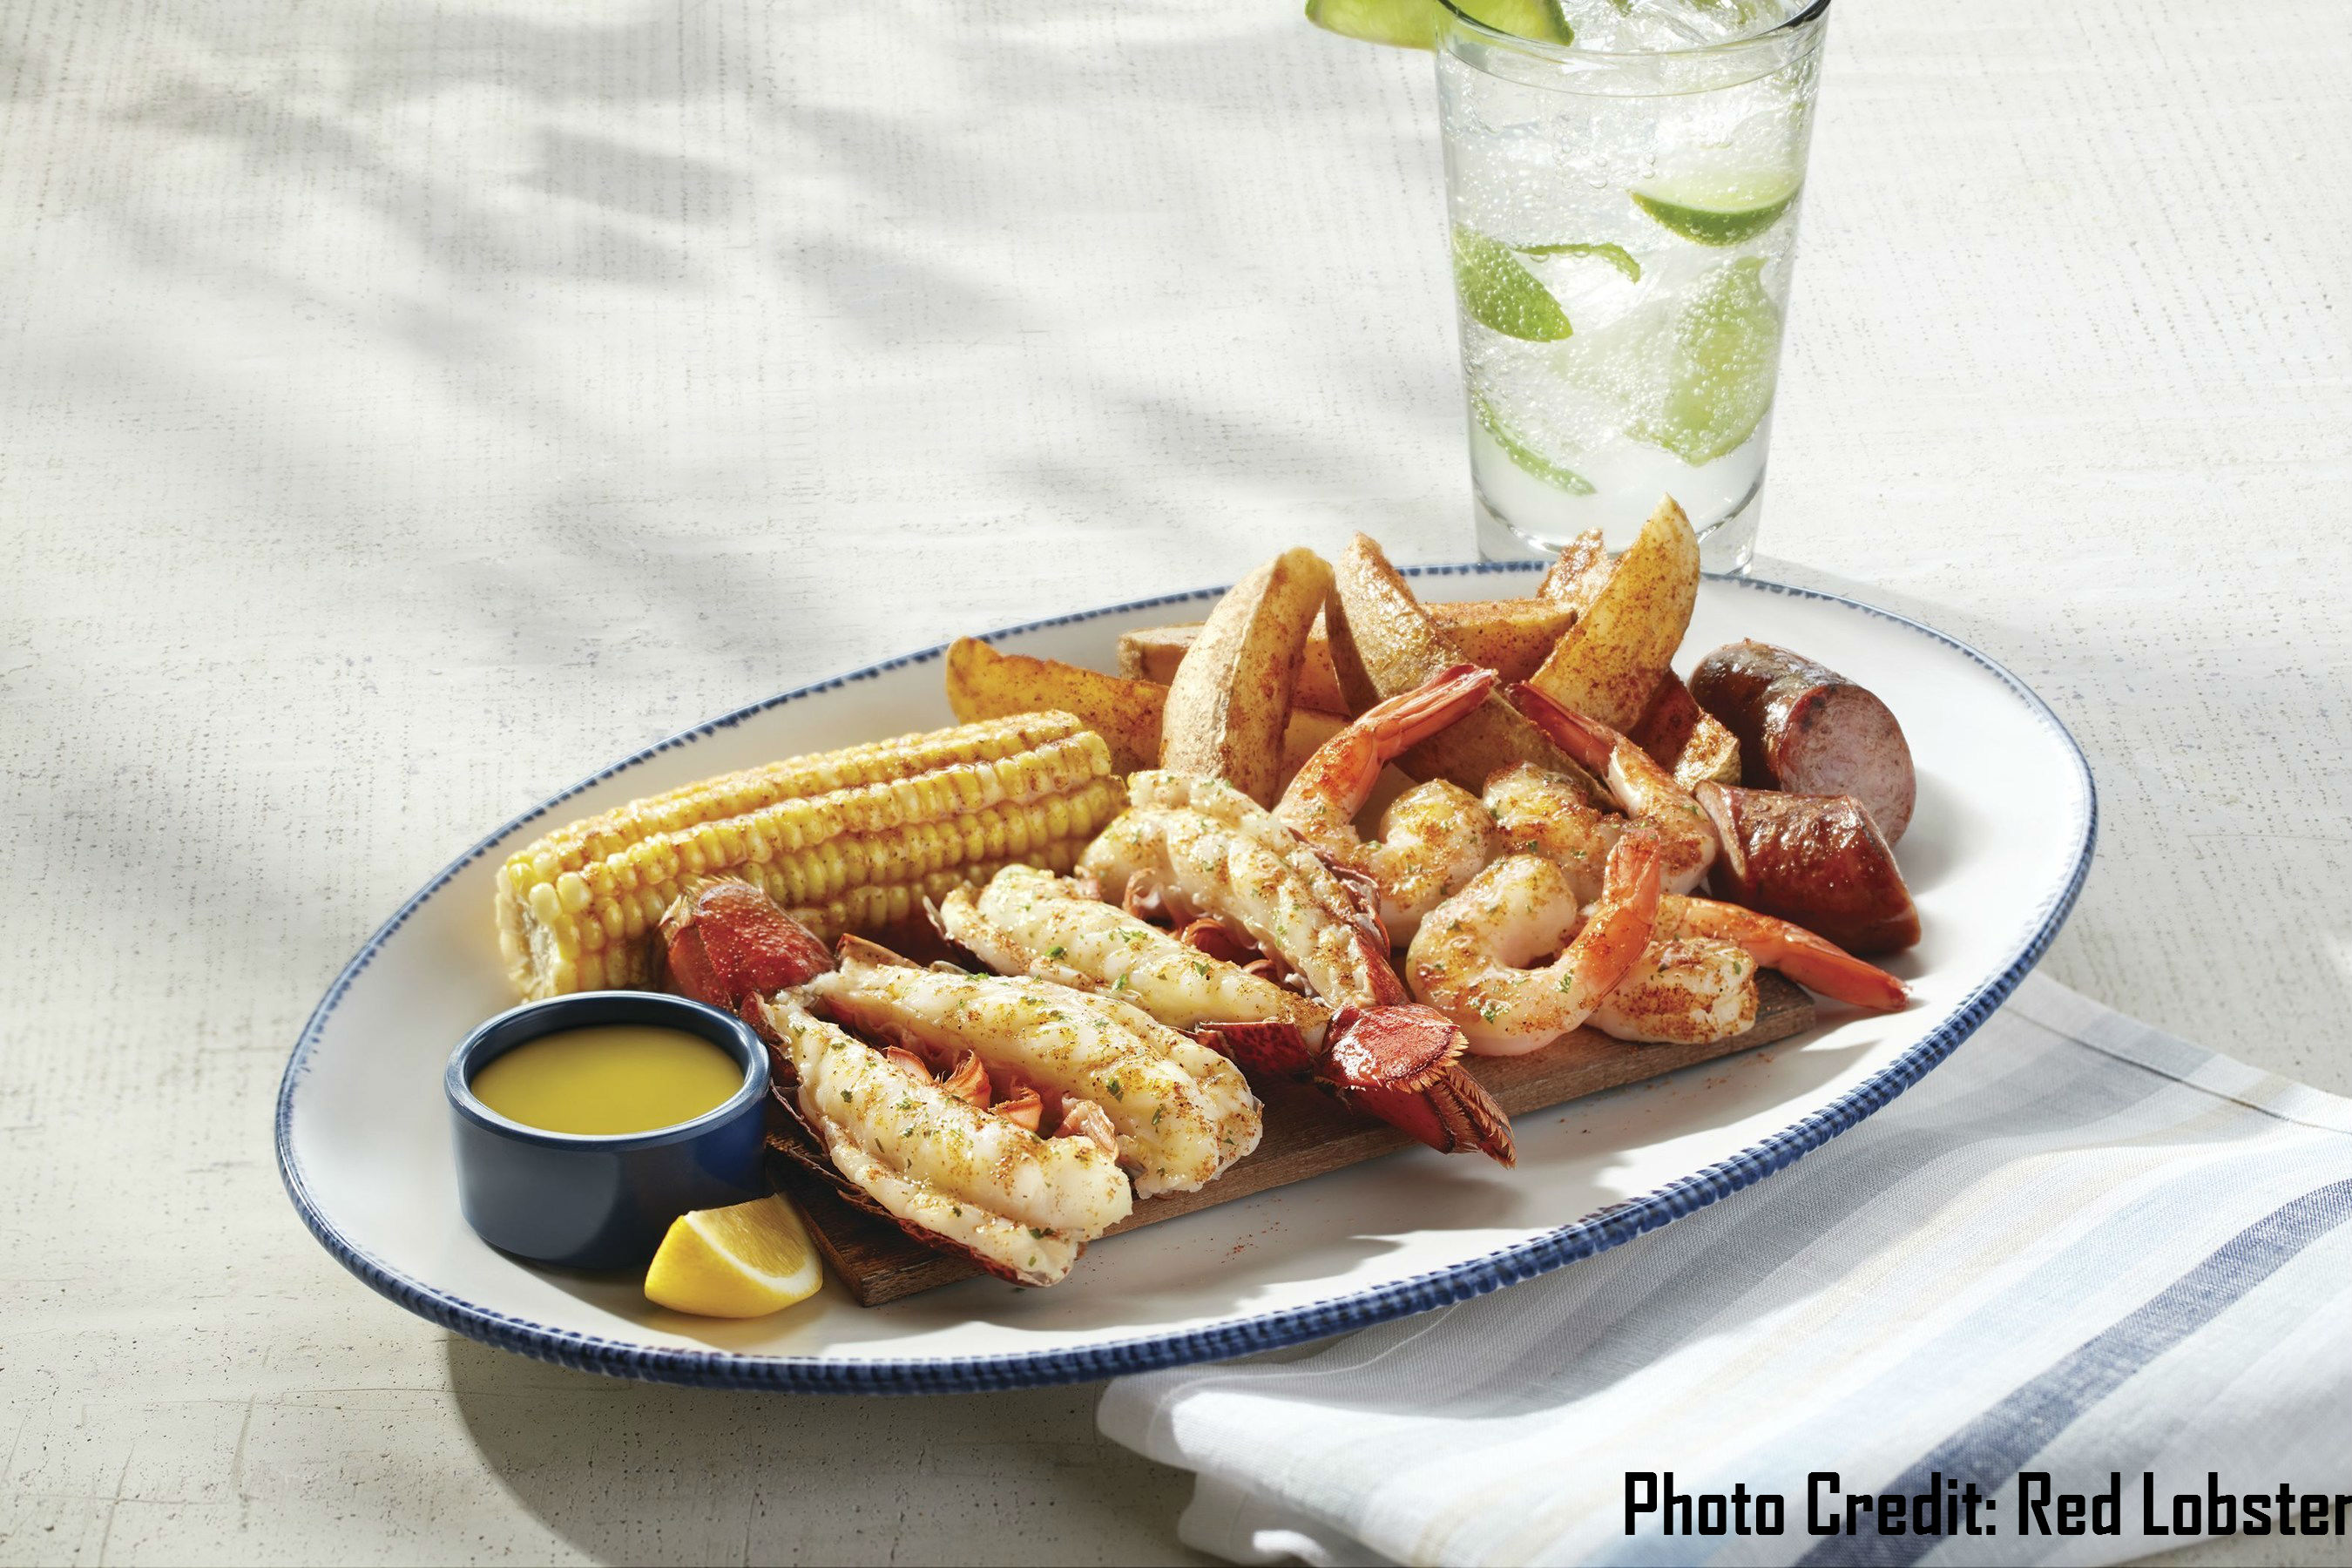 Red Lobster Launches Lobster and Shrimp Summerfest; Introduces Tuna Poke Dish